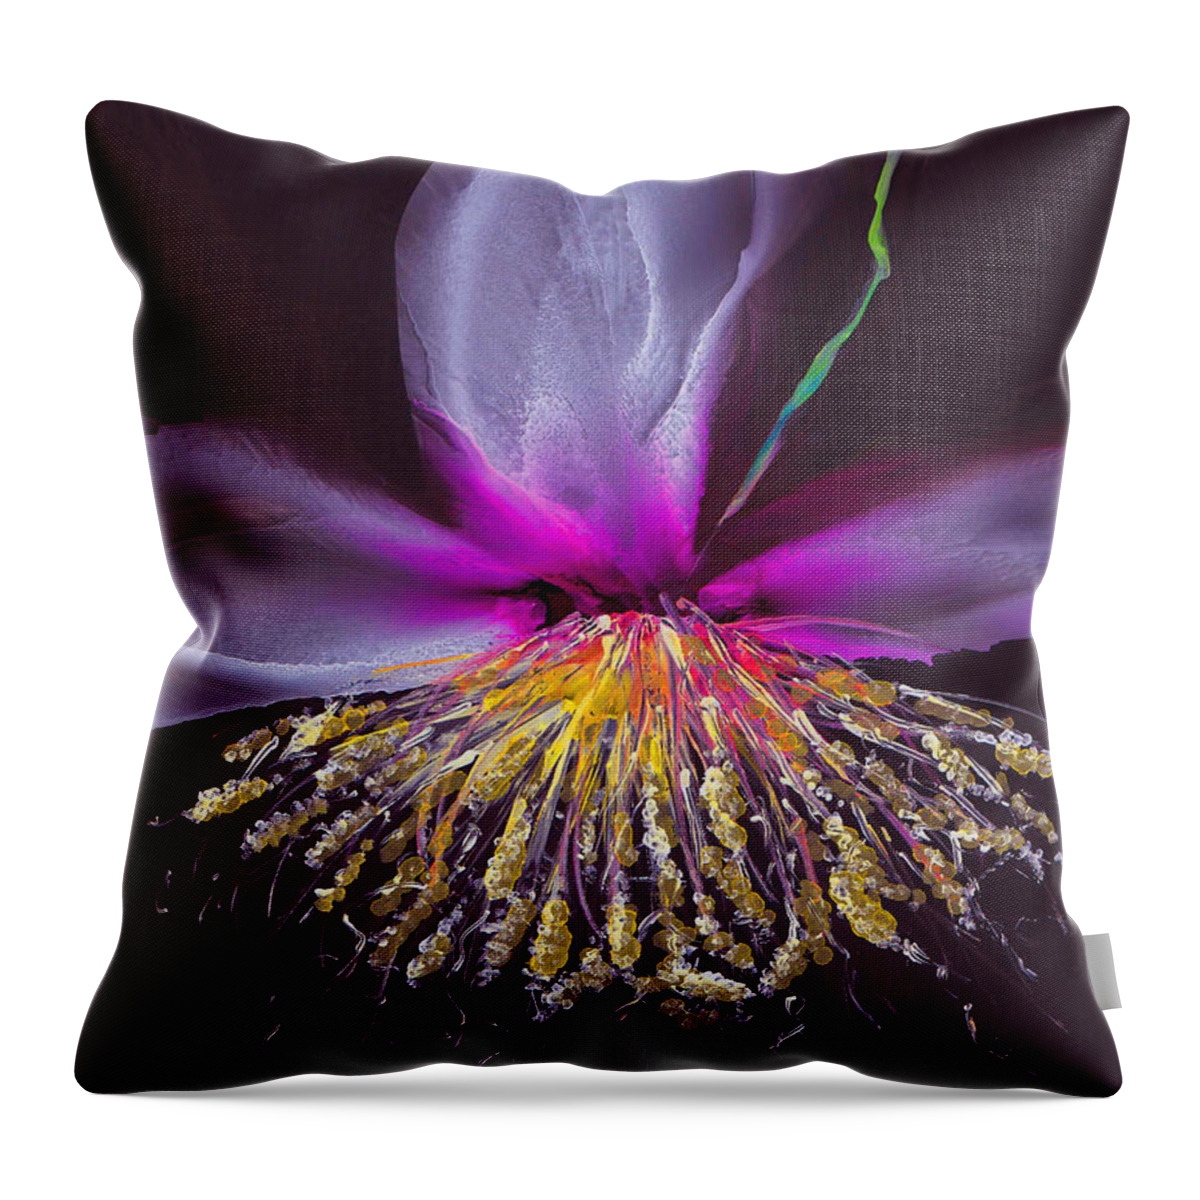 Flower Throw Pillow featuring the painting Suspended Beauty by Kimberly Deene Langlois